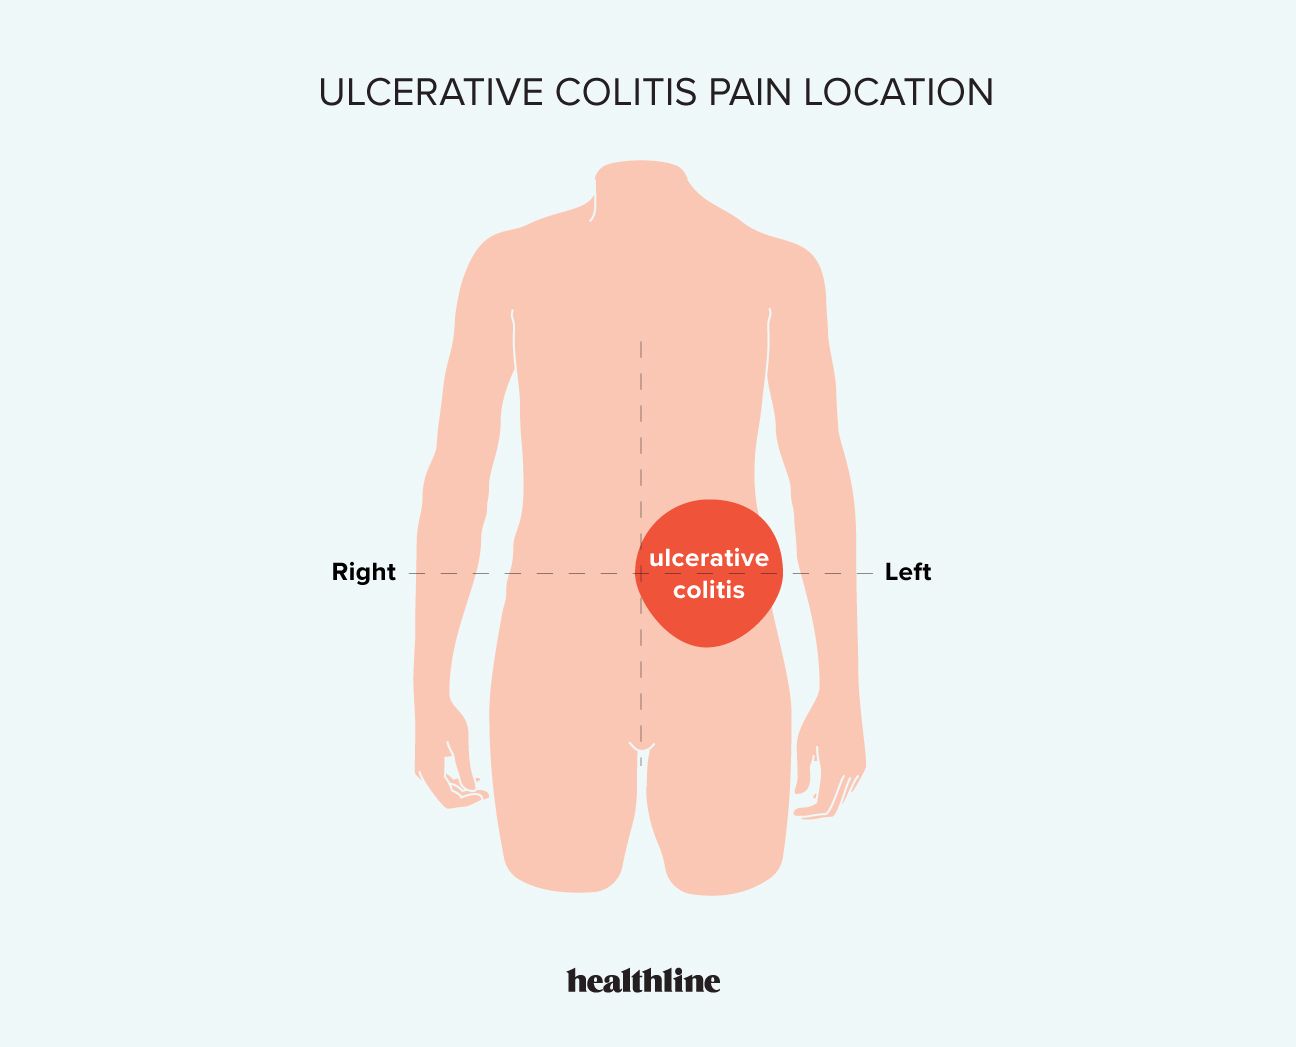 location of ulcerative colitis pain in the body